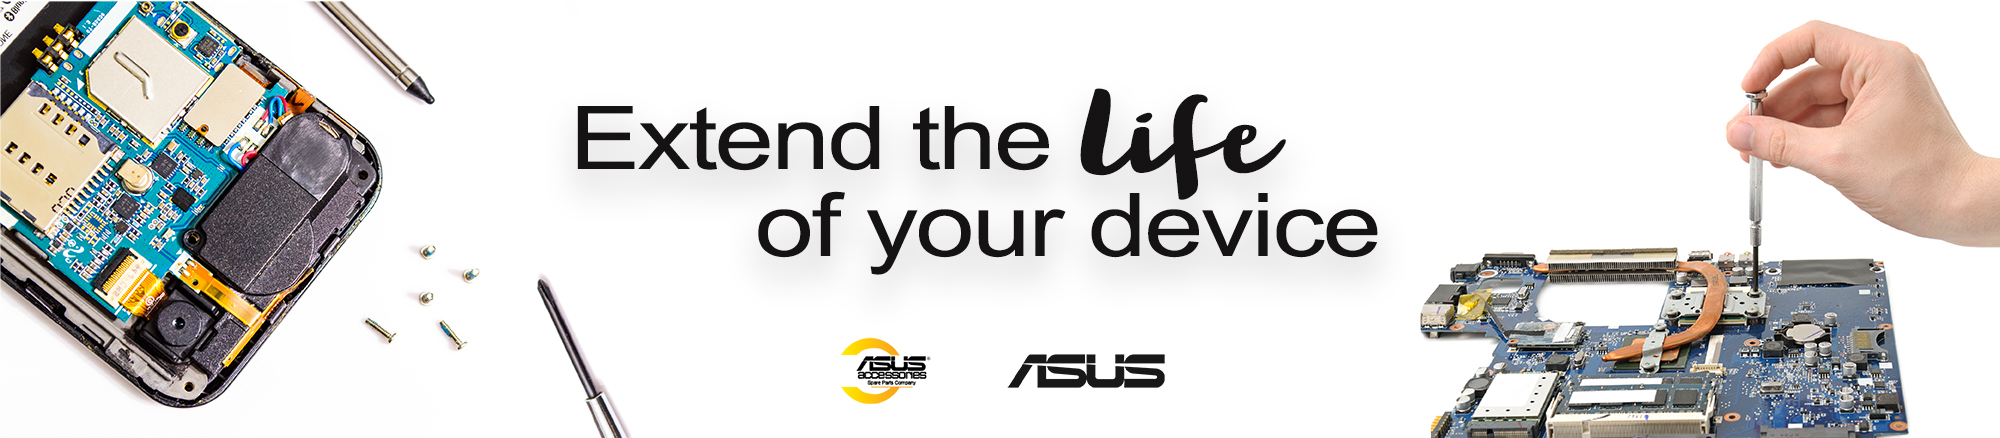 Extend the life of your device